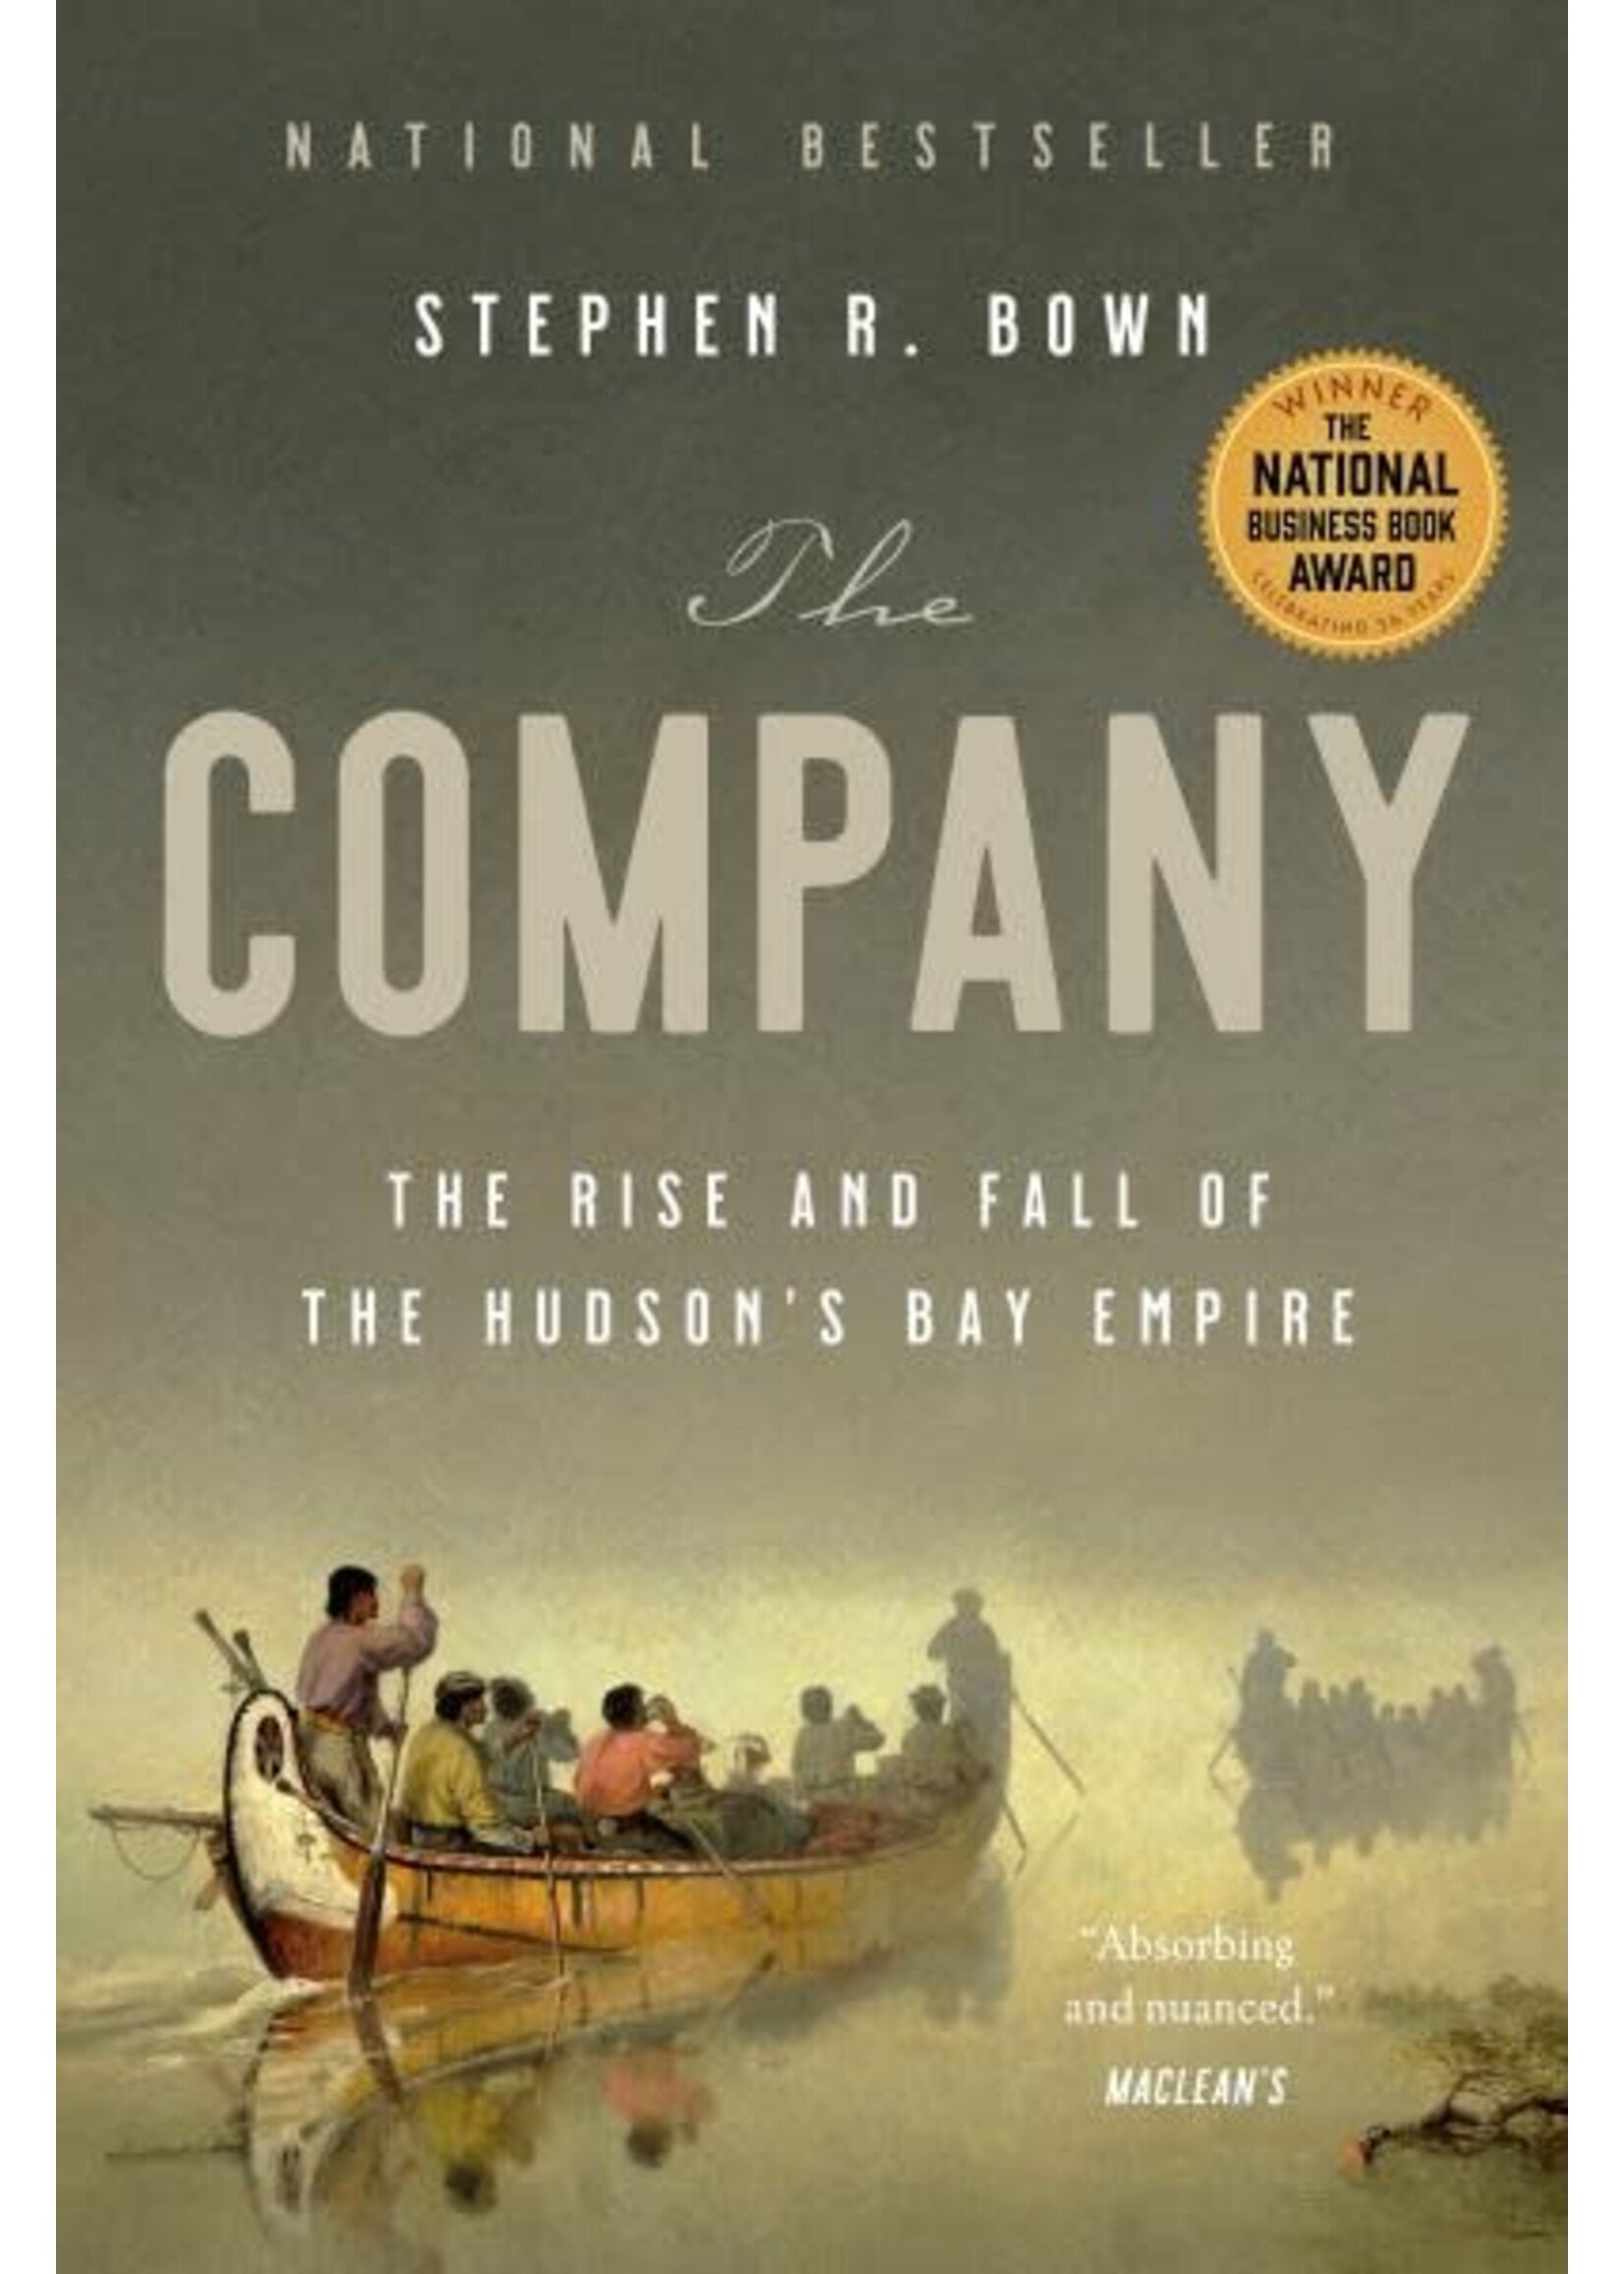 The Company: The Rise and Fall of the Hudson's Bay Empire by Stephen Bown